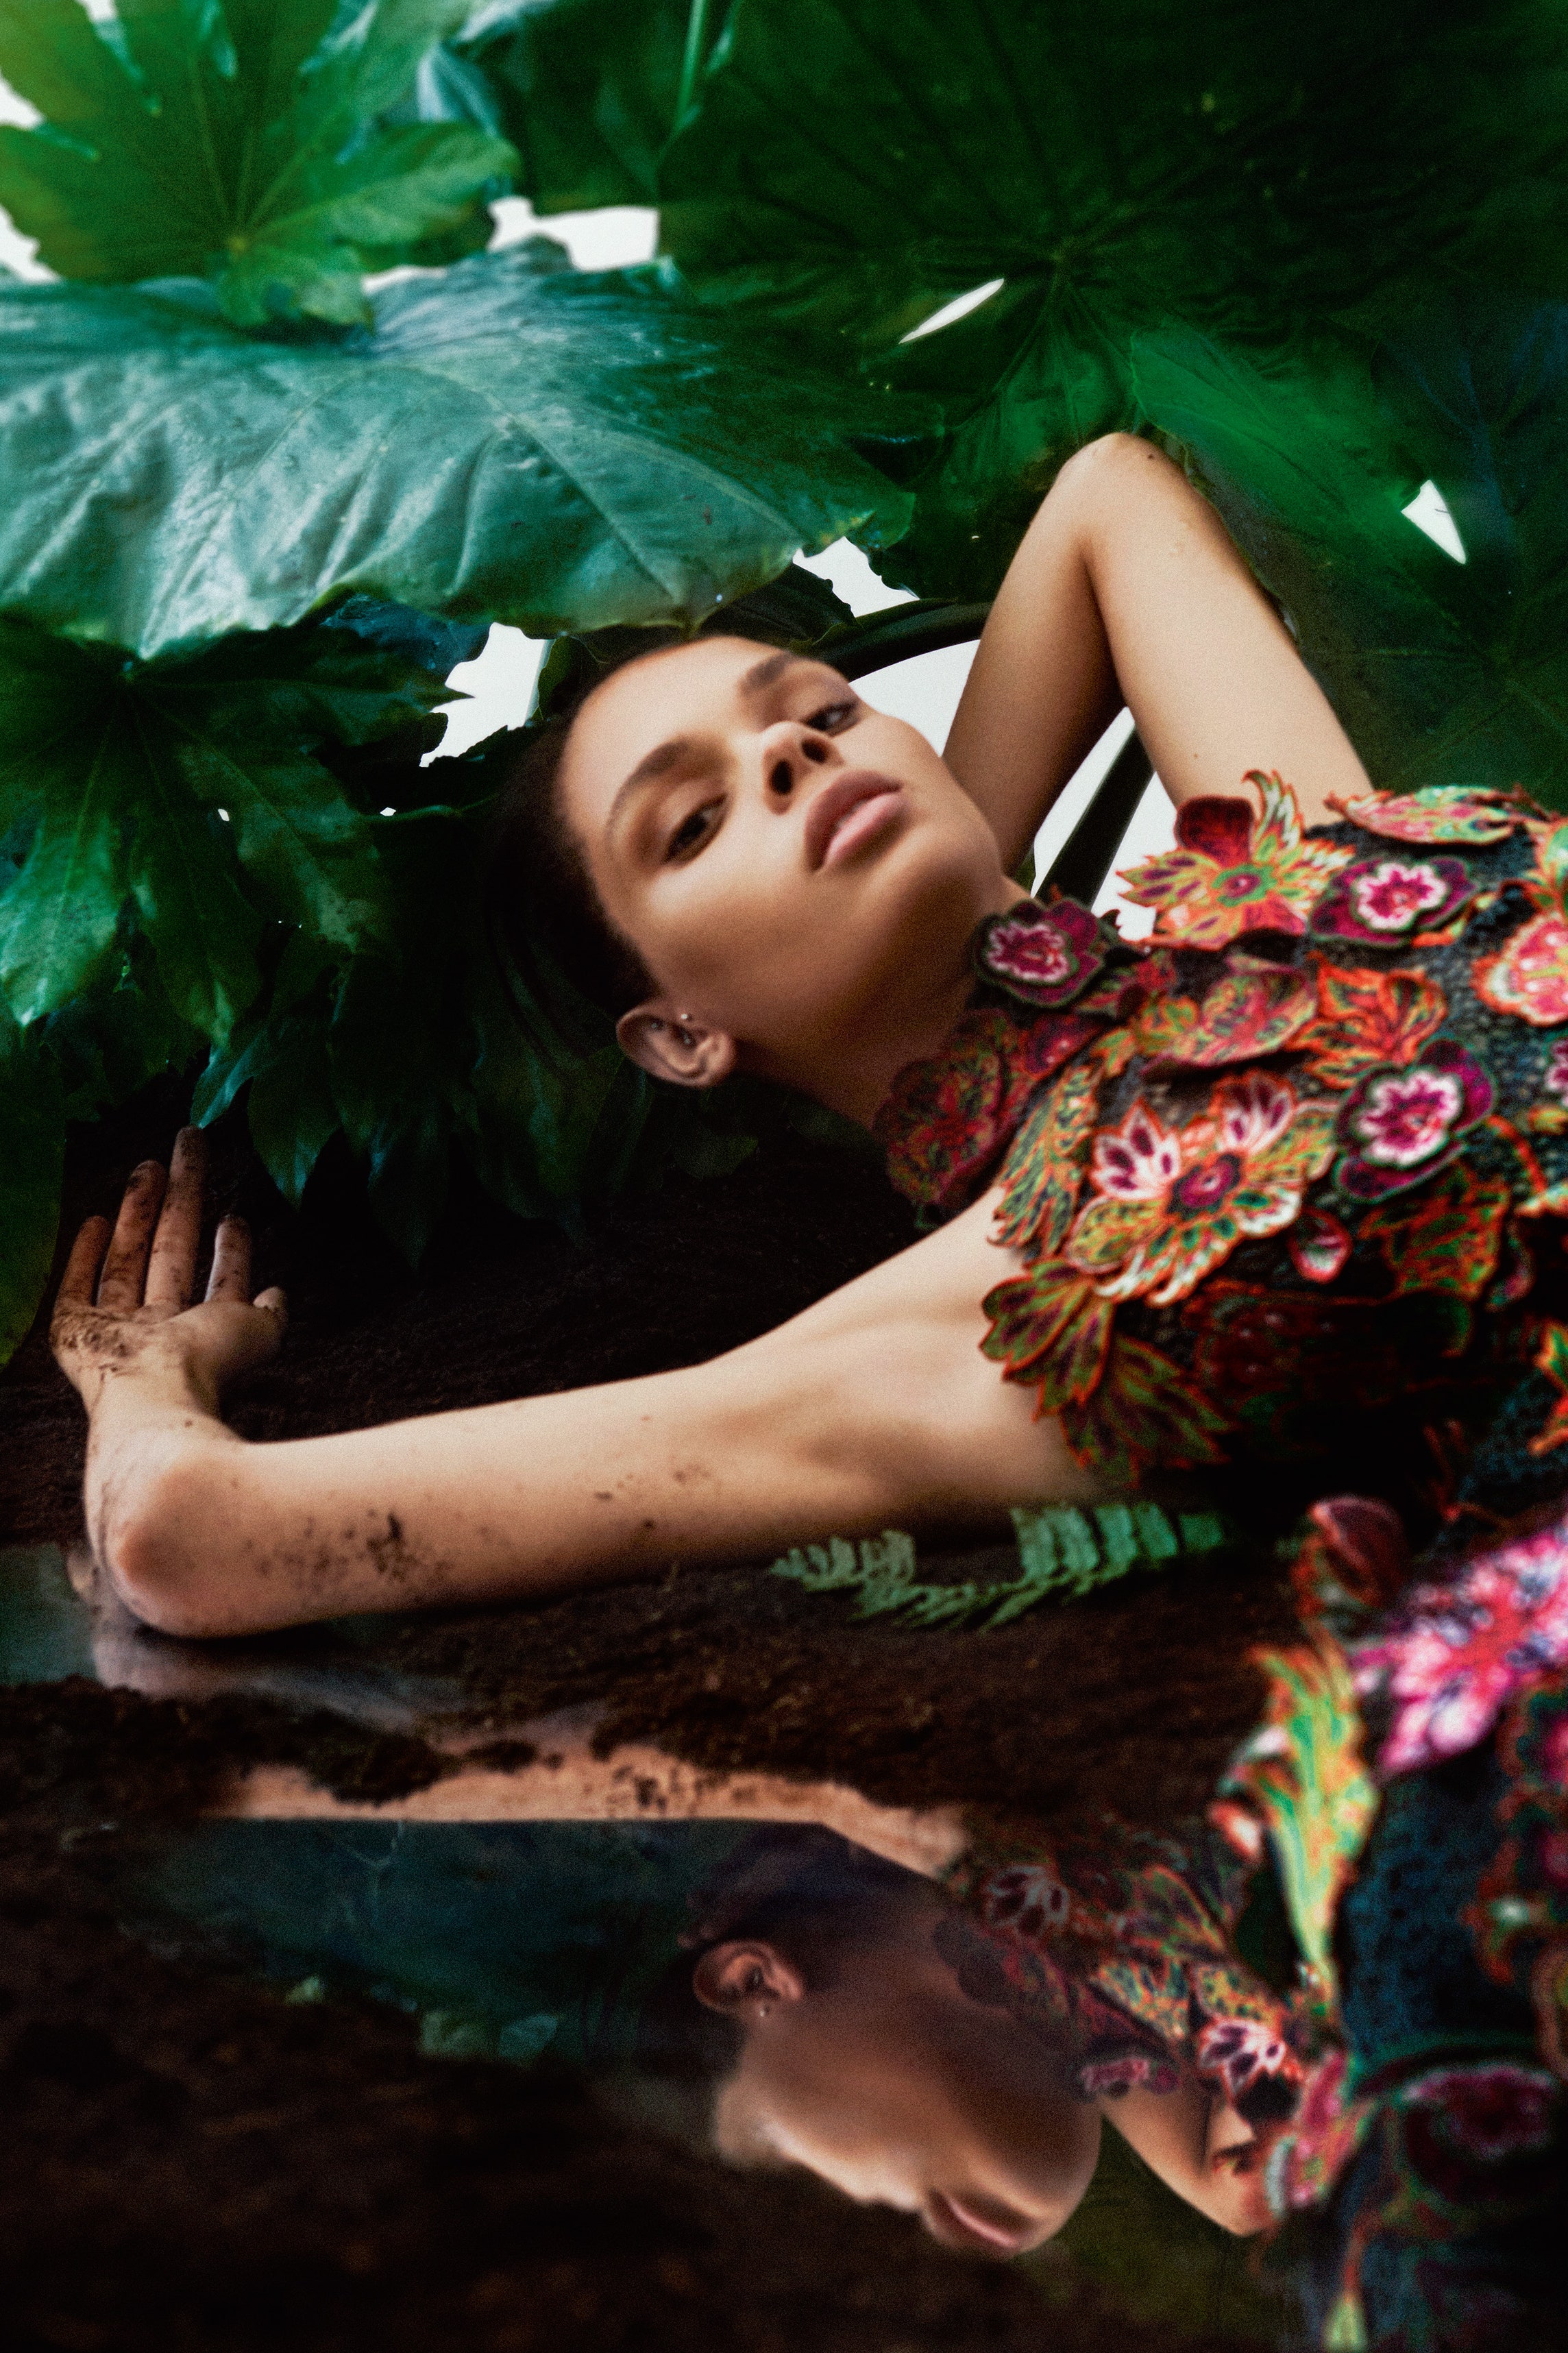 Model wearing floral pattern dress with flowers and leaves